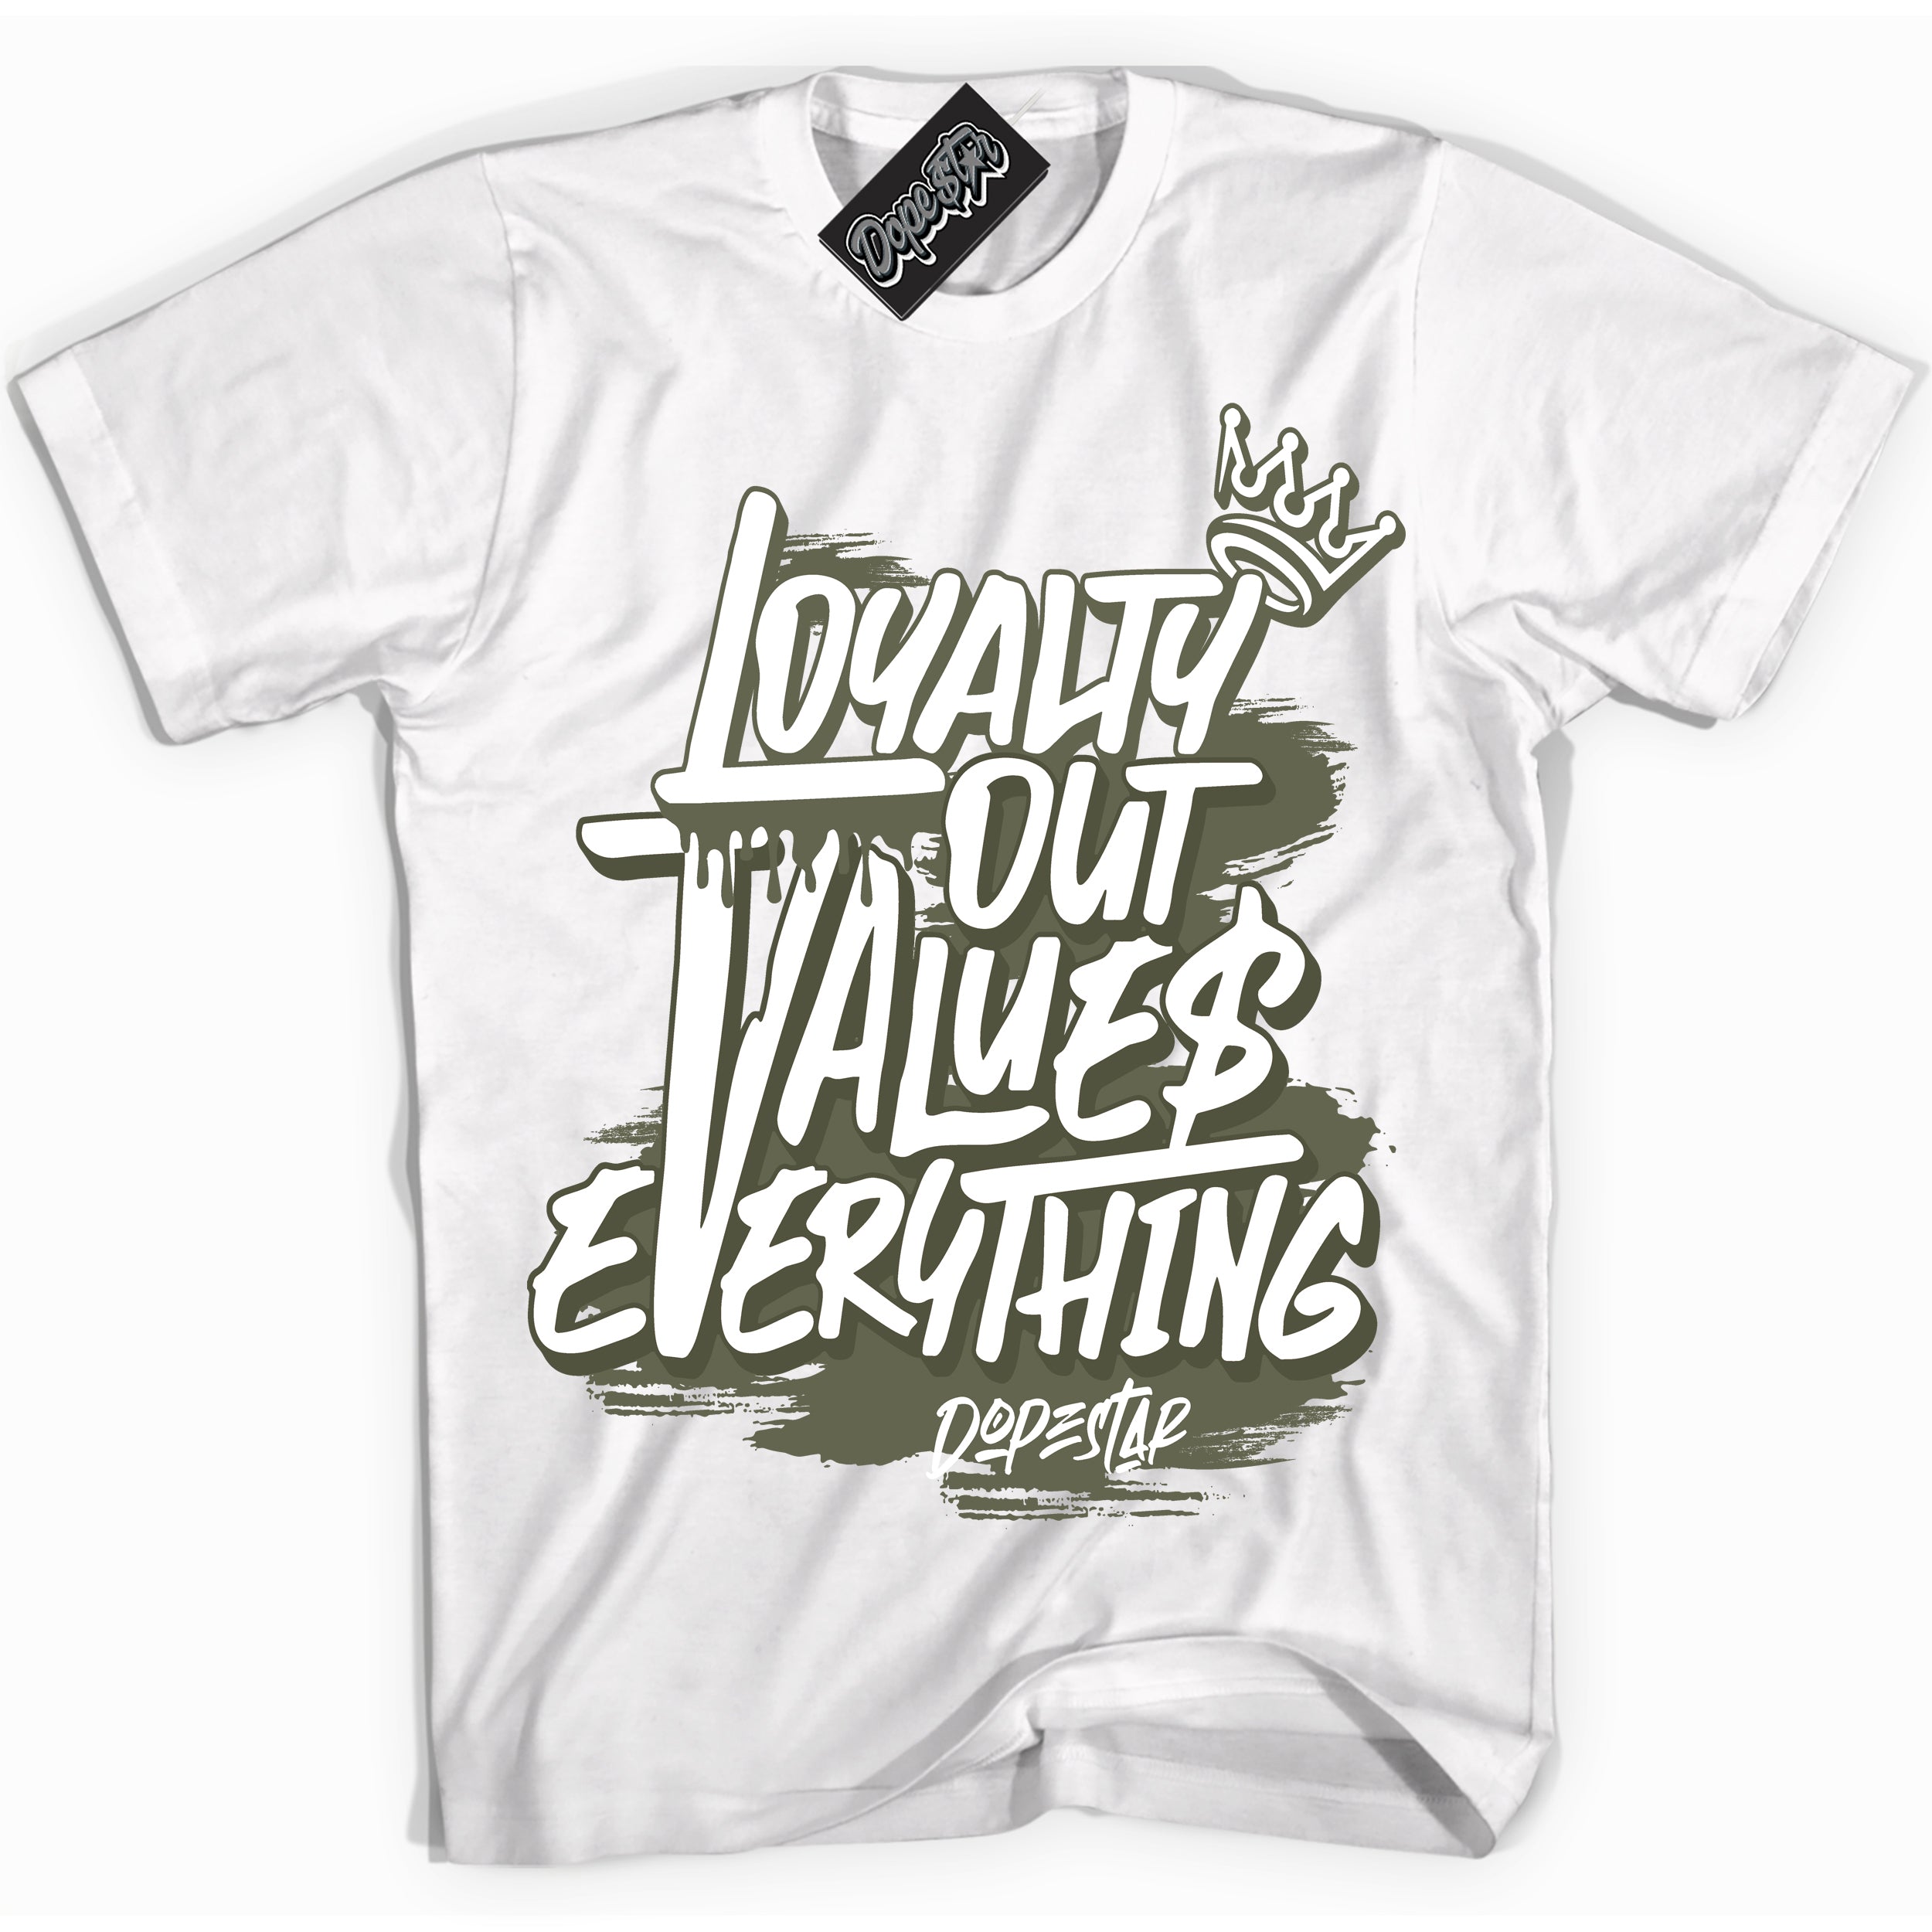 Cool White Shirt with “ Loyalty Out Values Everything” design that perfectly matches Olive Sneakers.